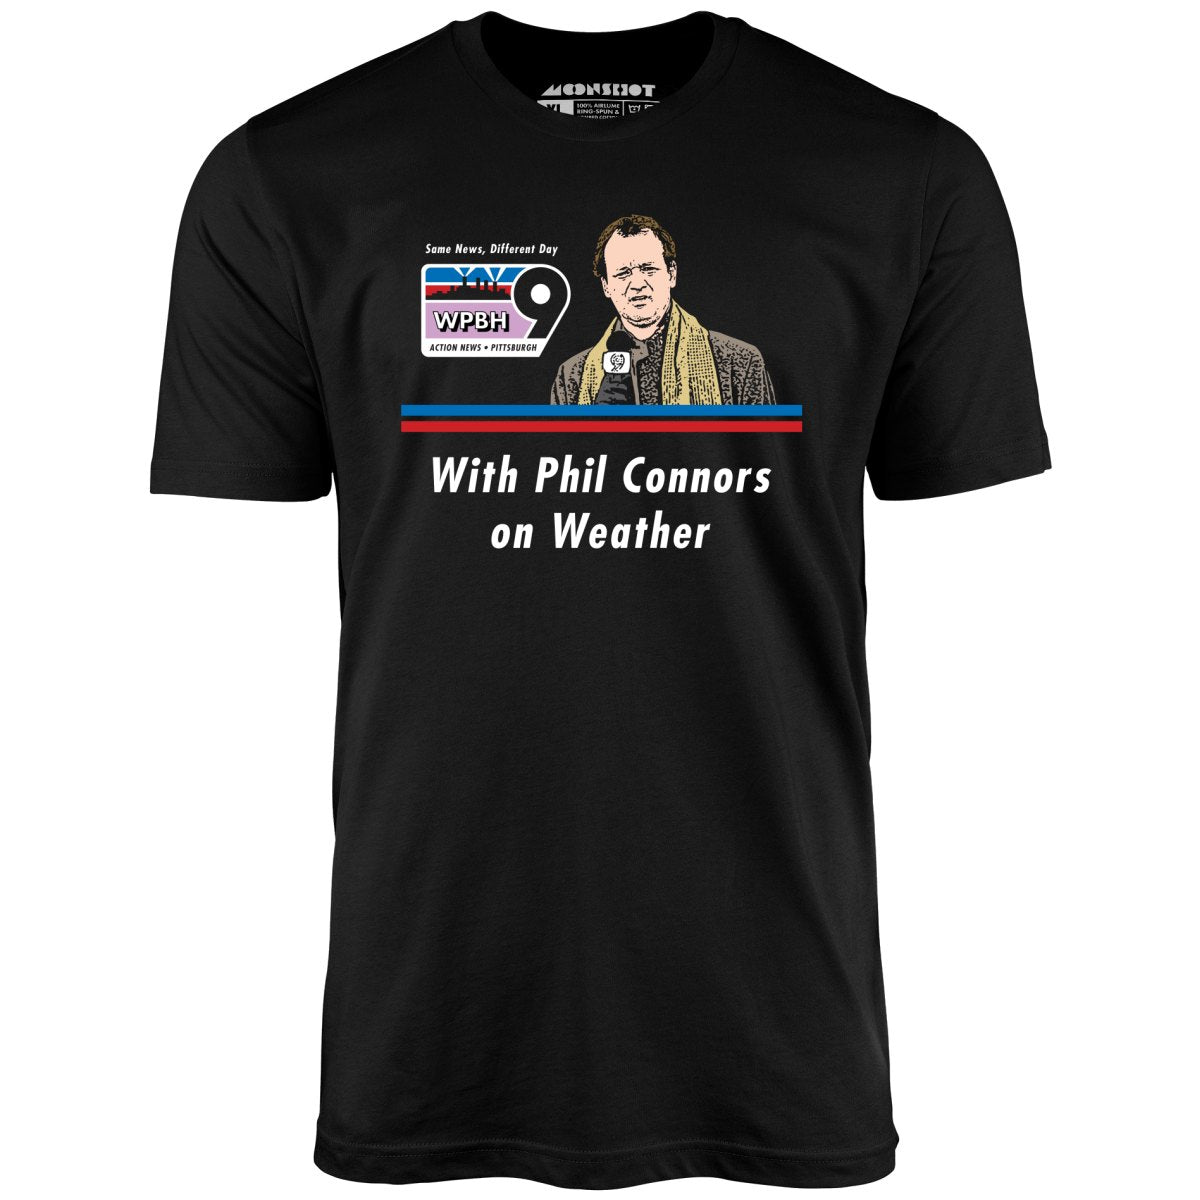 WPBH News with Phil Connors - Groundhog Day - Unisex T-Shirt